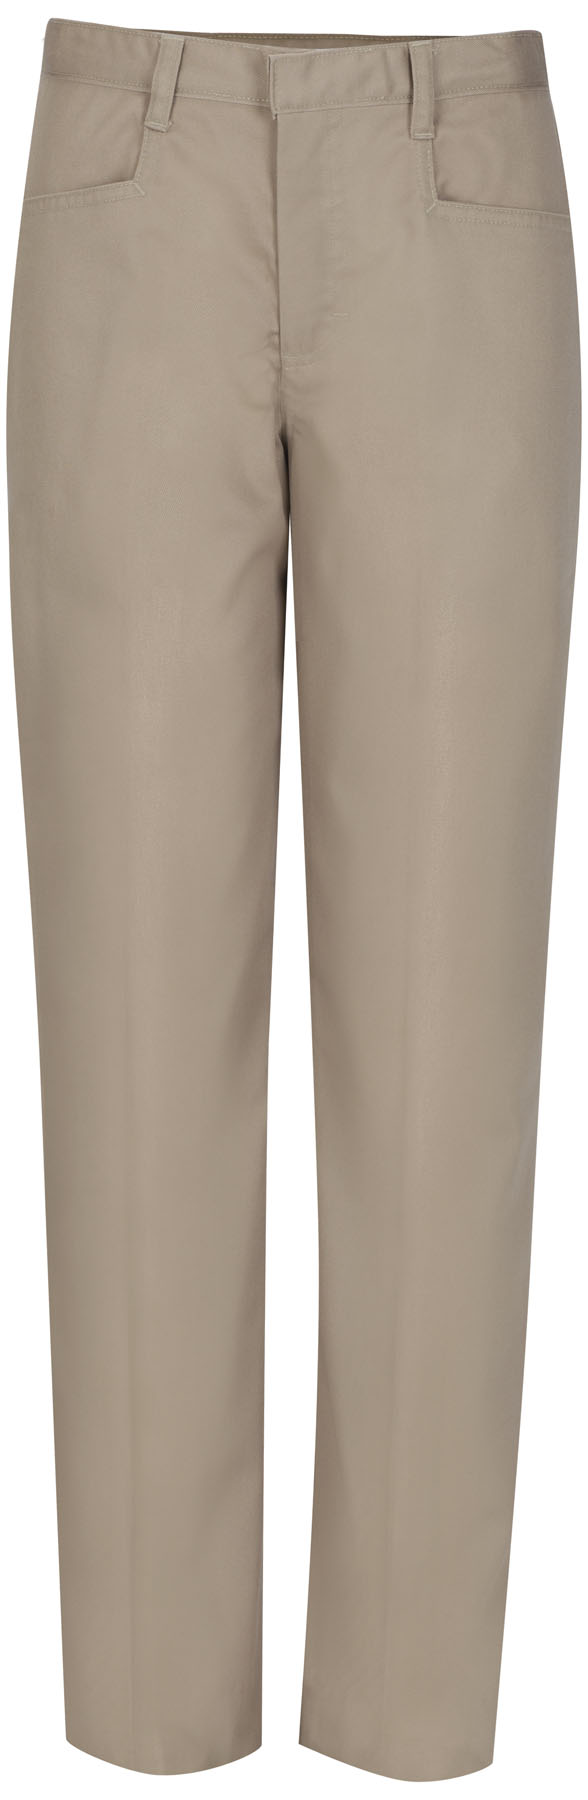 RG-Girls(Youth) low rise khaki pant with adjustable waist.